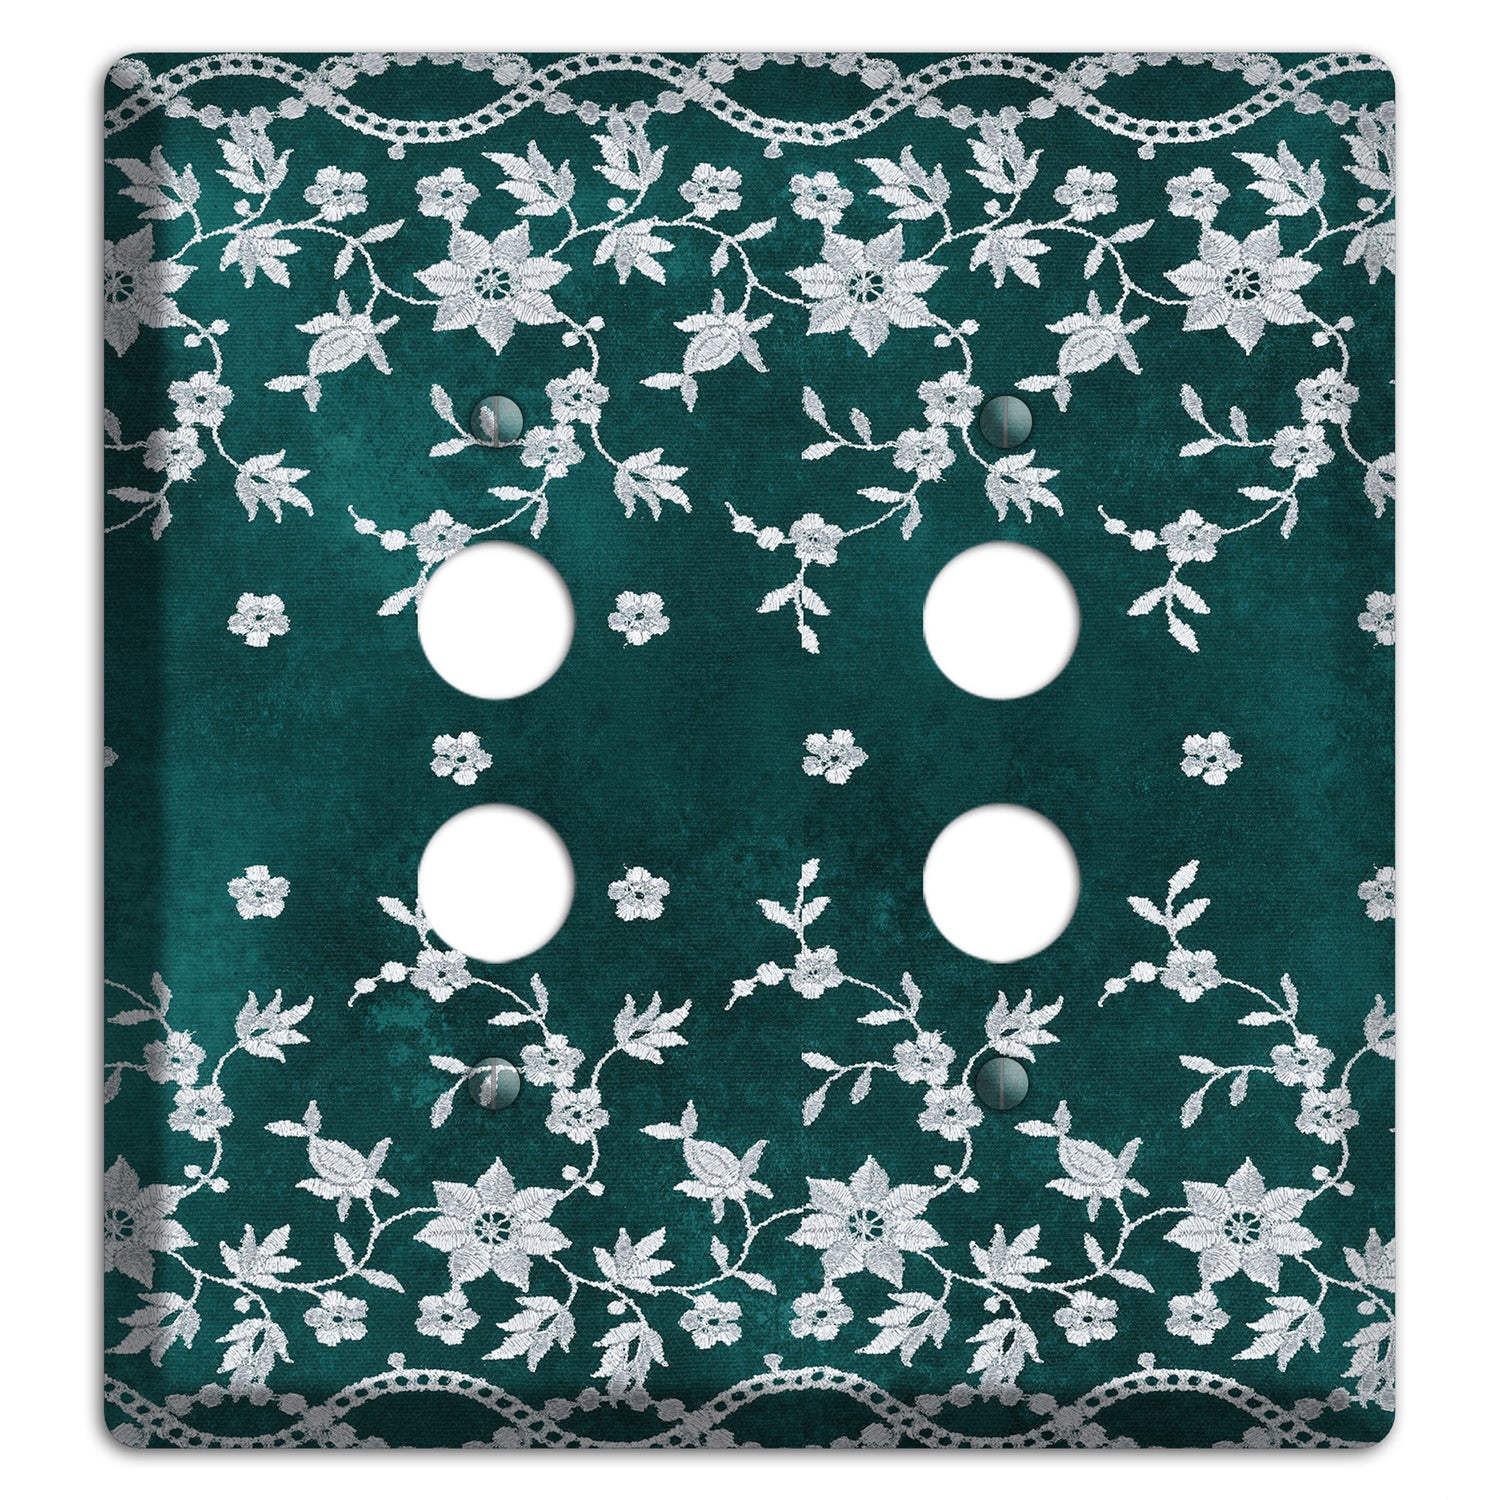 Embroidered Floral Teal 2 Pushbutton Wallplate